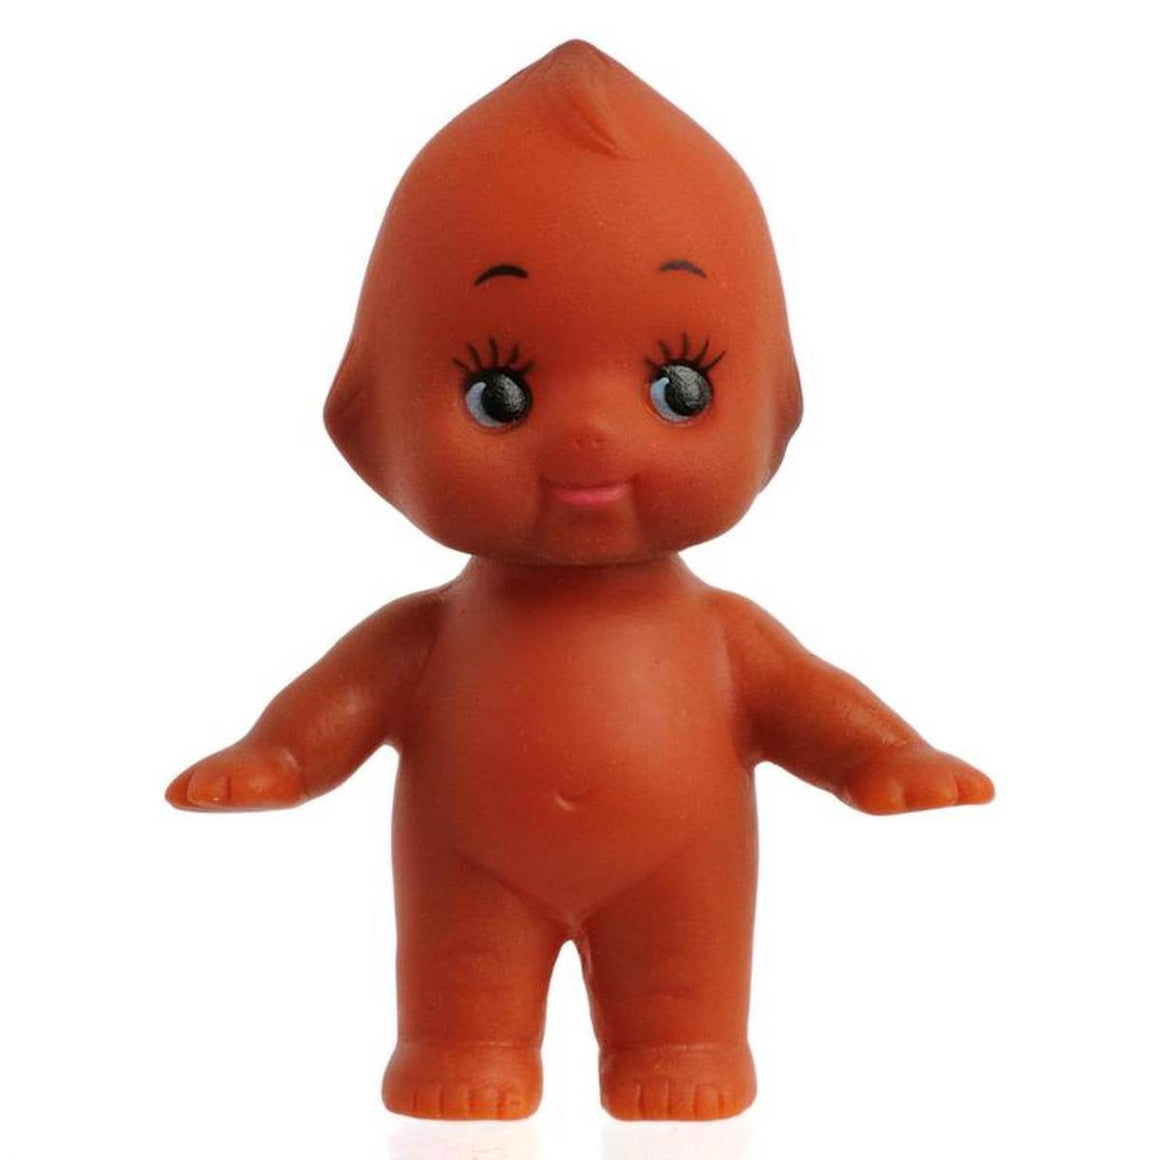 A vintage style Kewpie doll, shown standing with arms upraised. The doll has a brown skin tone, is nude, cherub- like and features large eyes with distinct eyelashes.